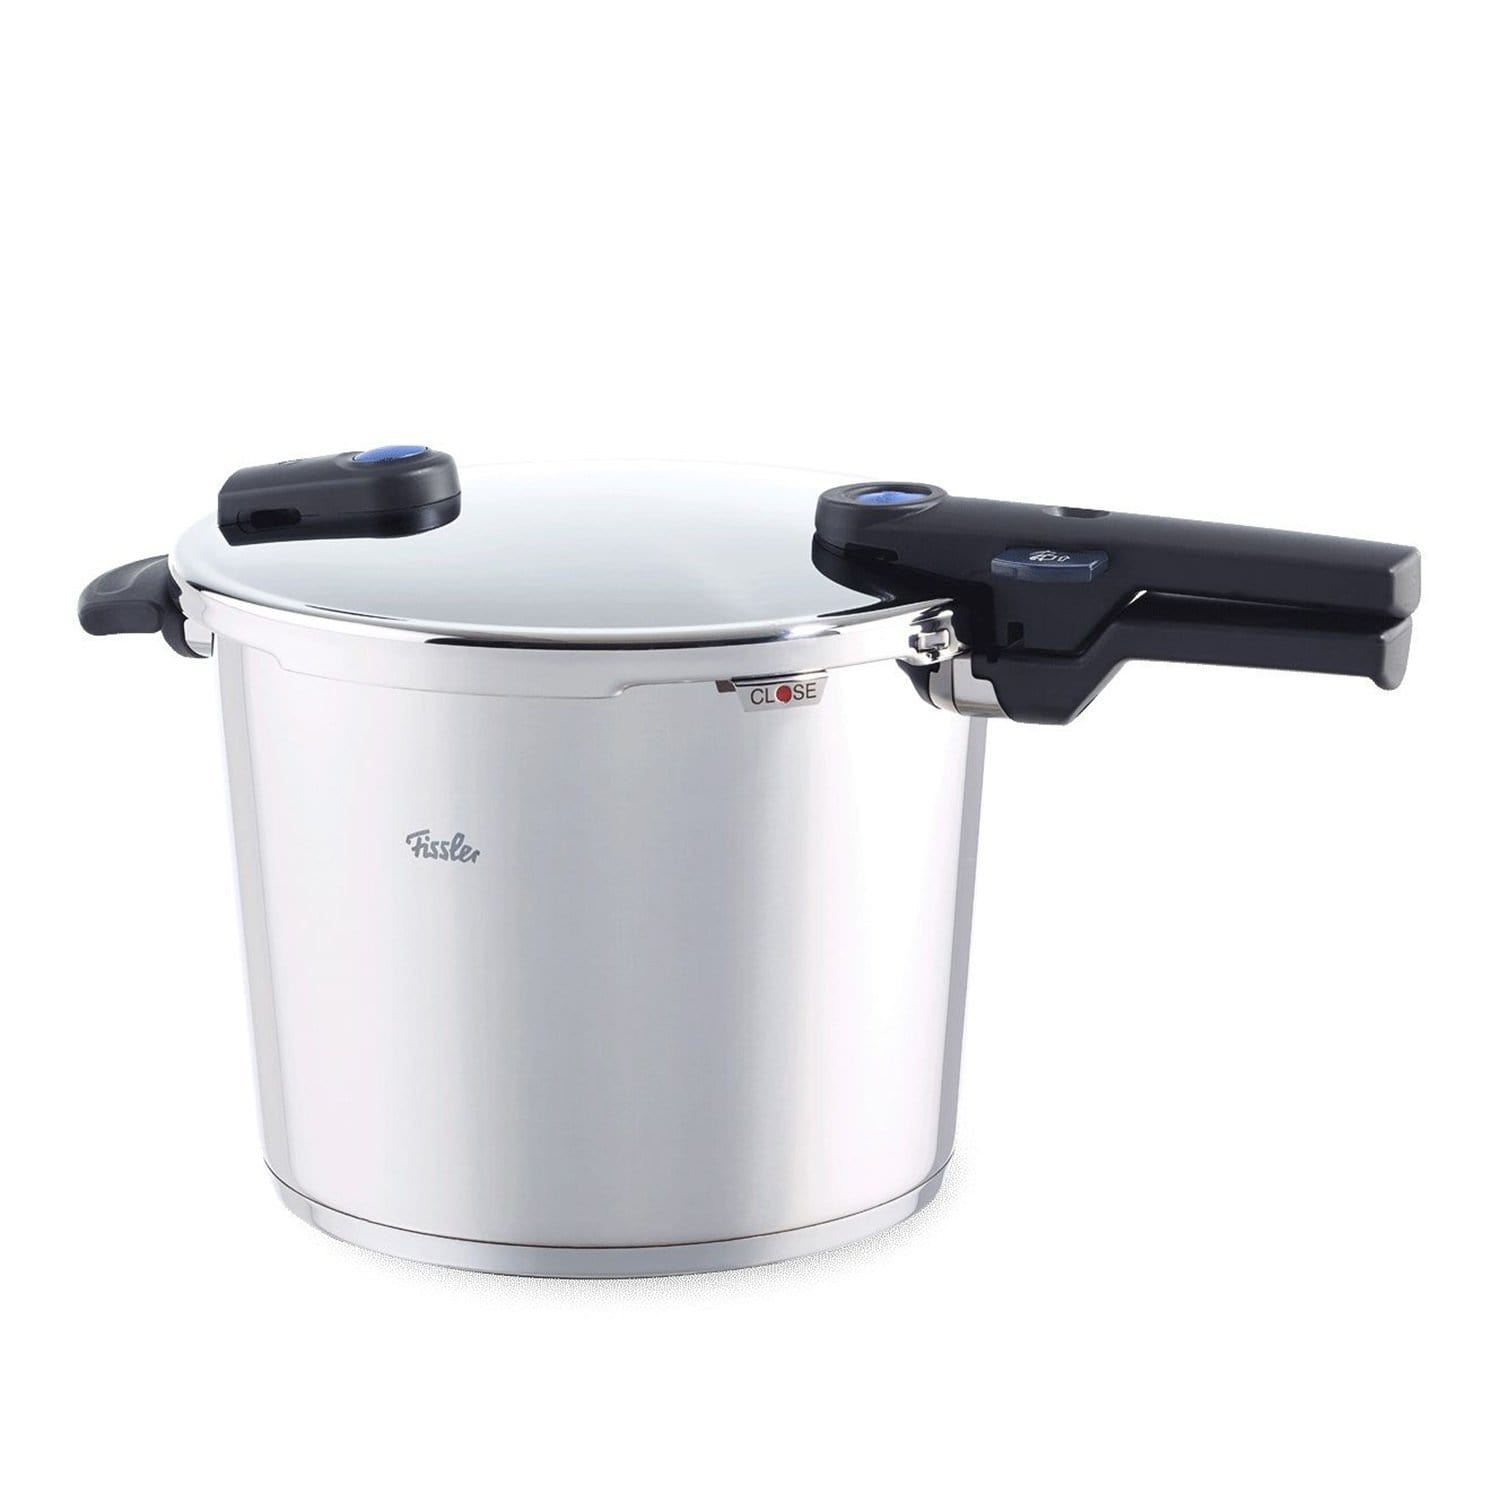 Fissler Vitaquick Pressure Cooker without Insert - 10 Litres - 600-700-10-000/0 - Jashanmal Home